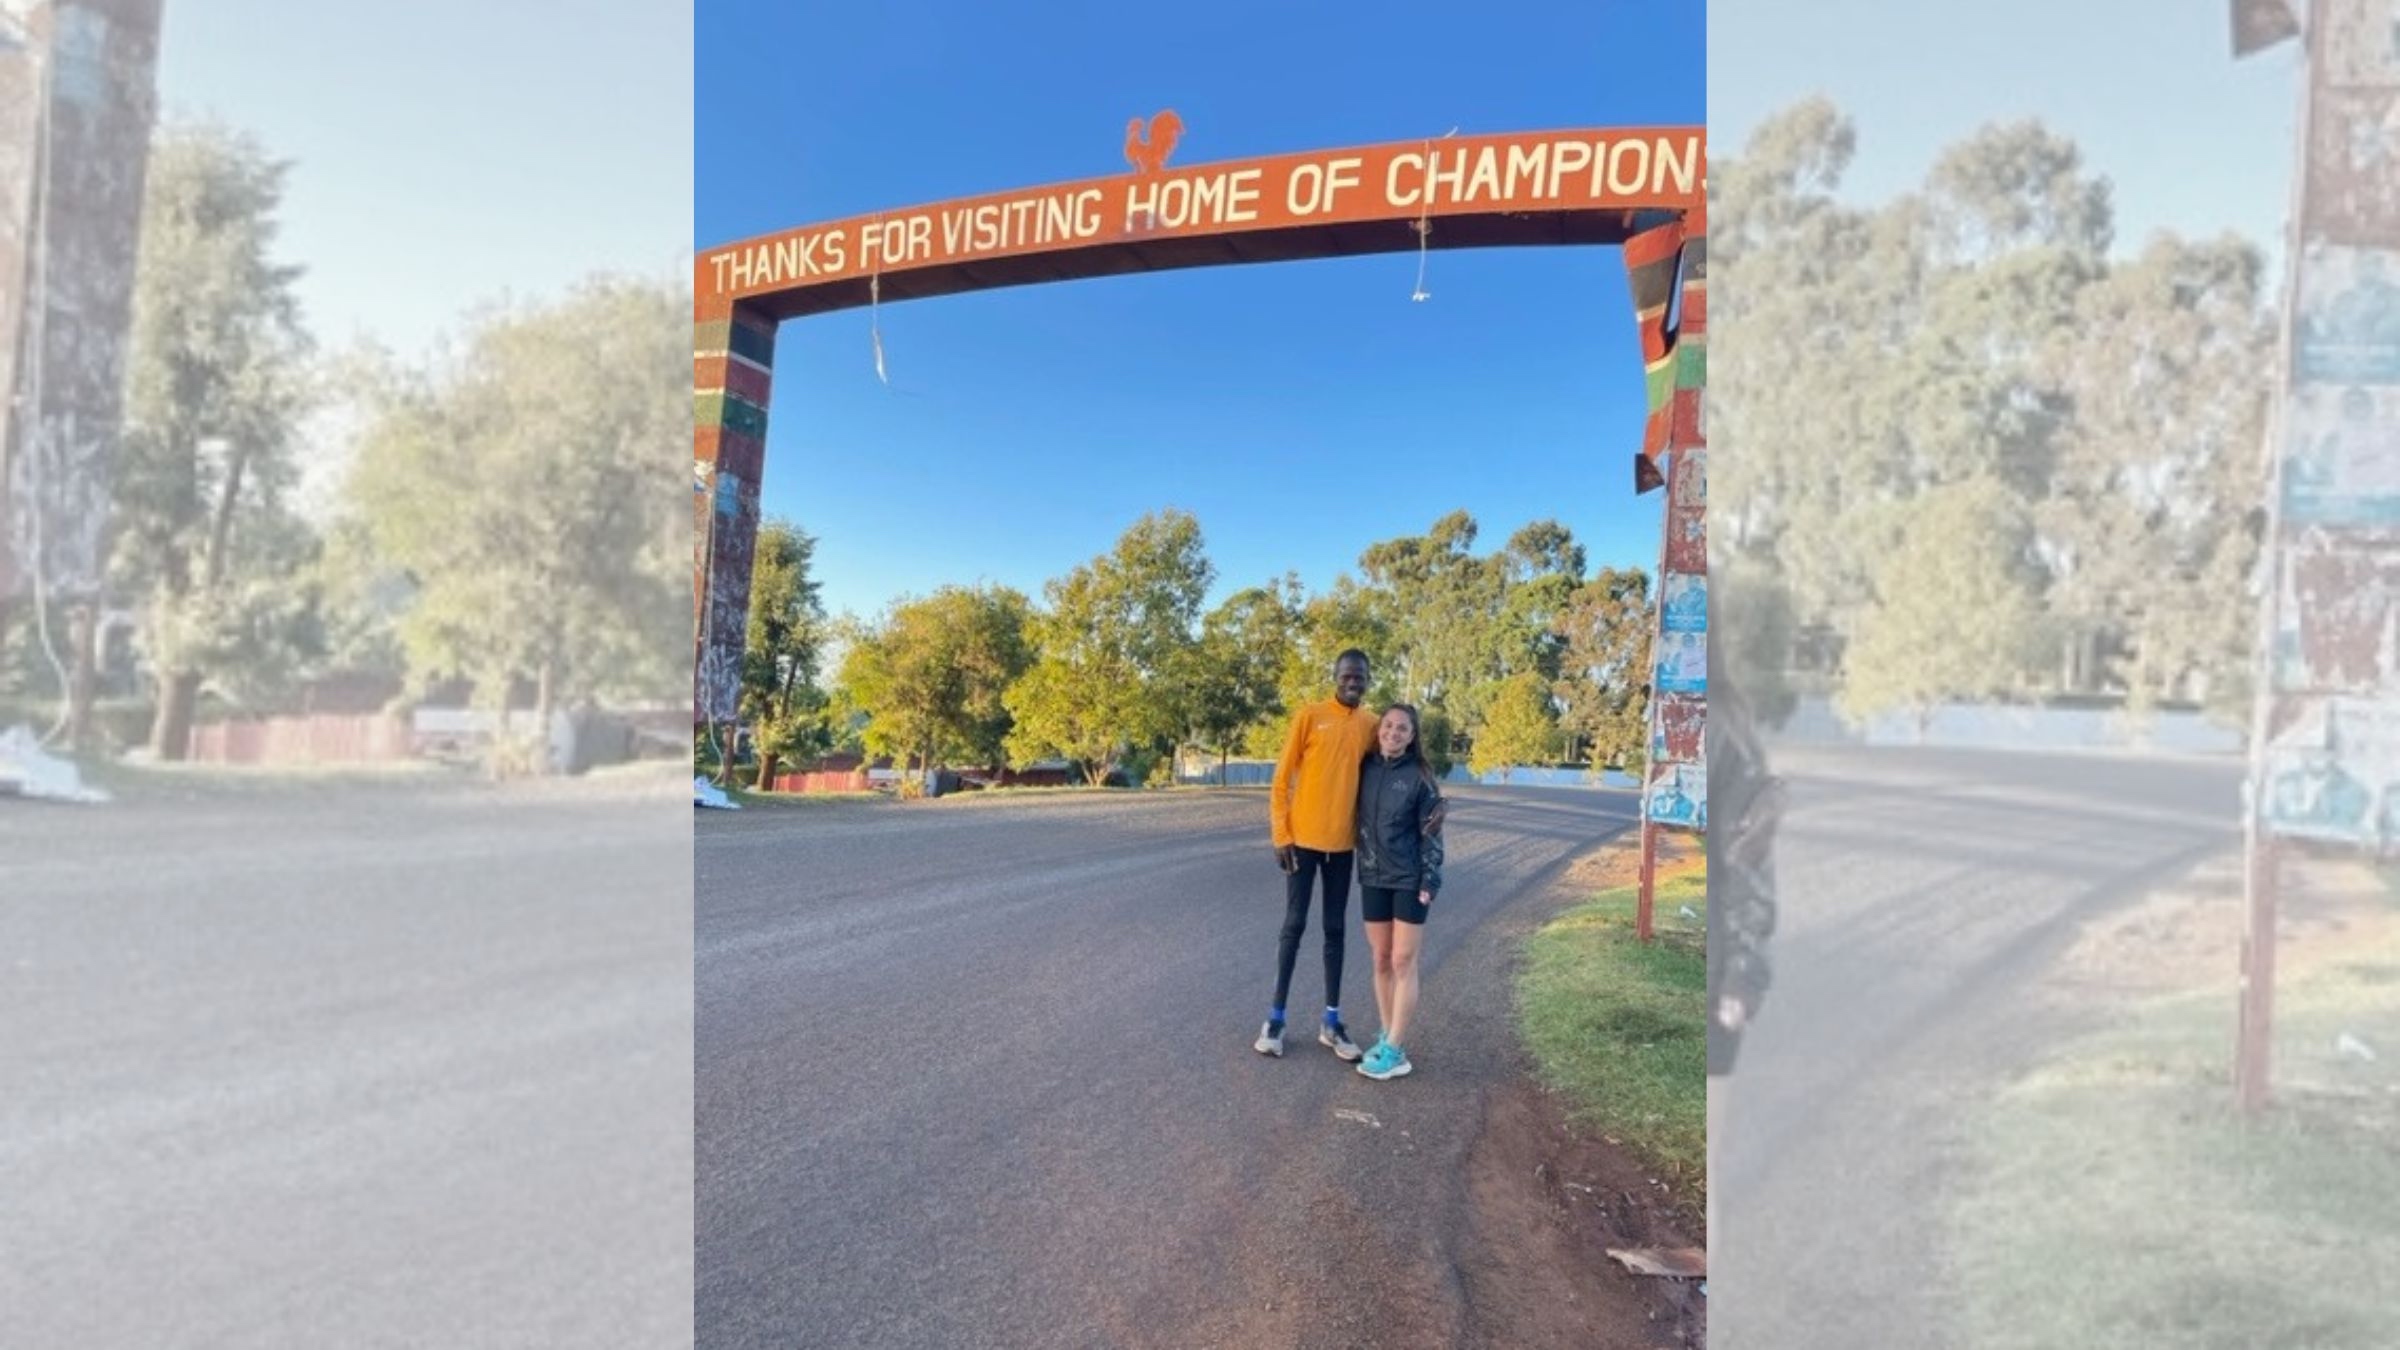 Two runners embrace under a banner on a famous training grounds in Kenya